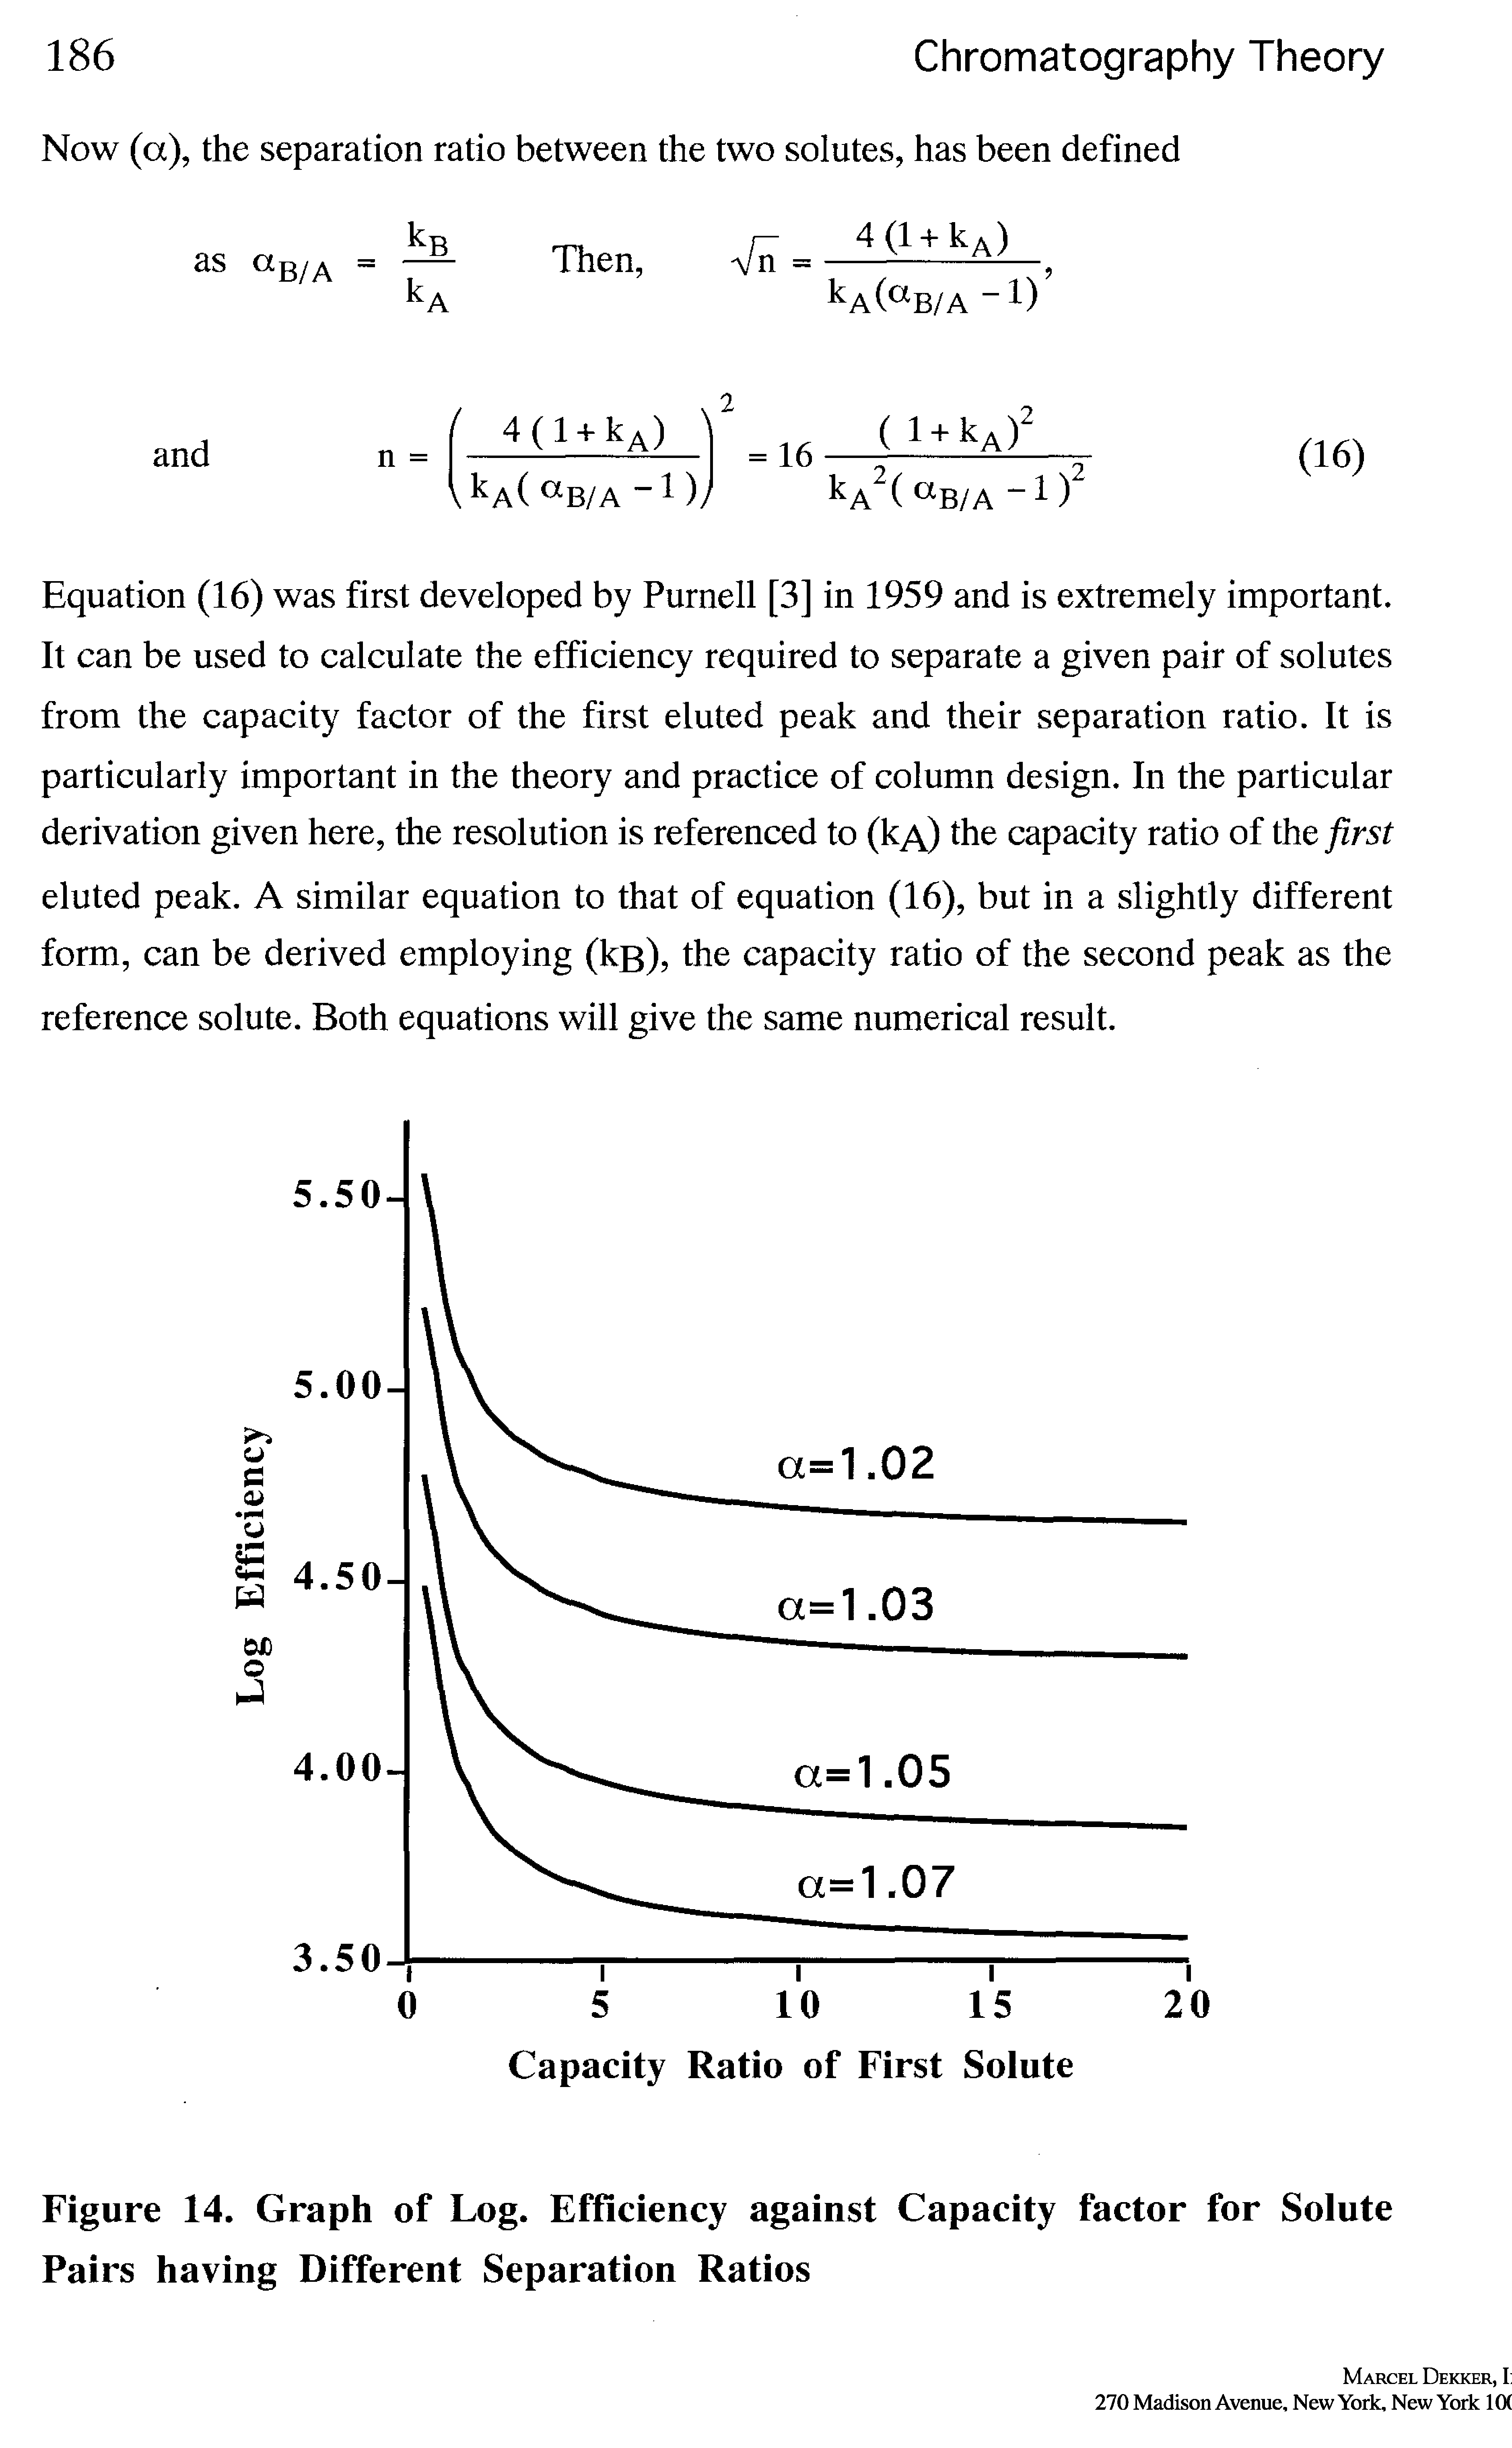 Figure 14. Graph of Log. Efficiency against Capacity factor for Solute Pairs having Different Separation Ratios...